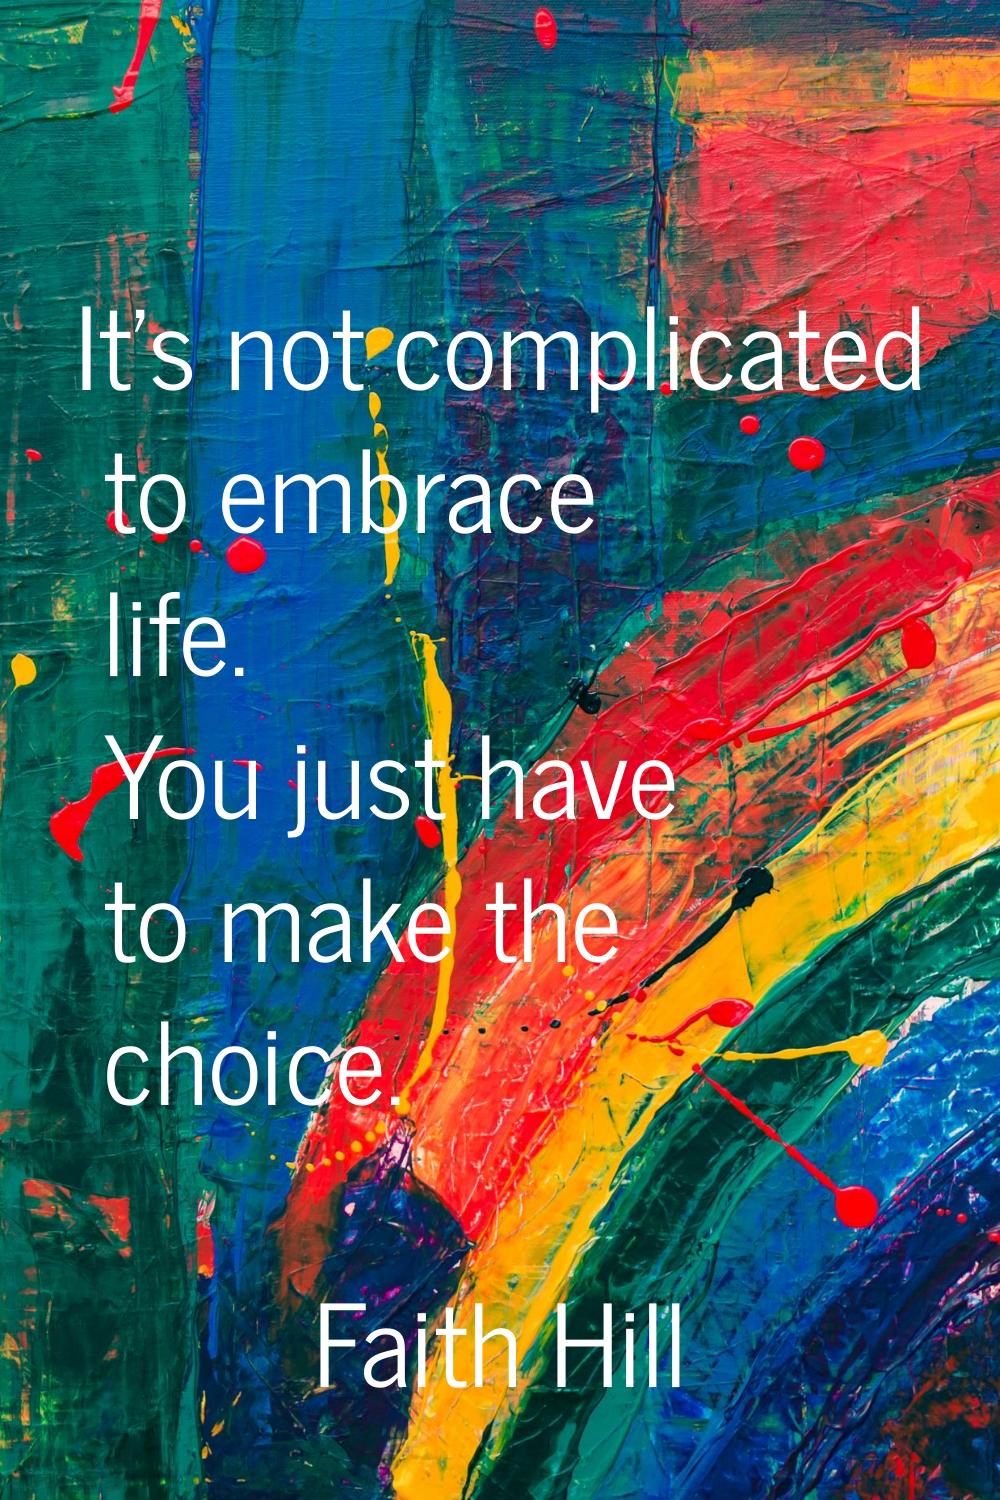 It's not complicated to embrace life. You just have to make the choice.